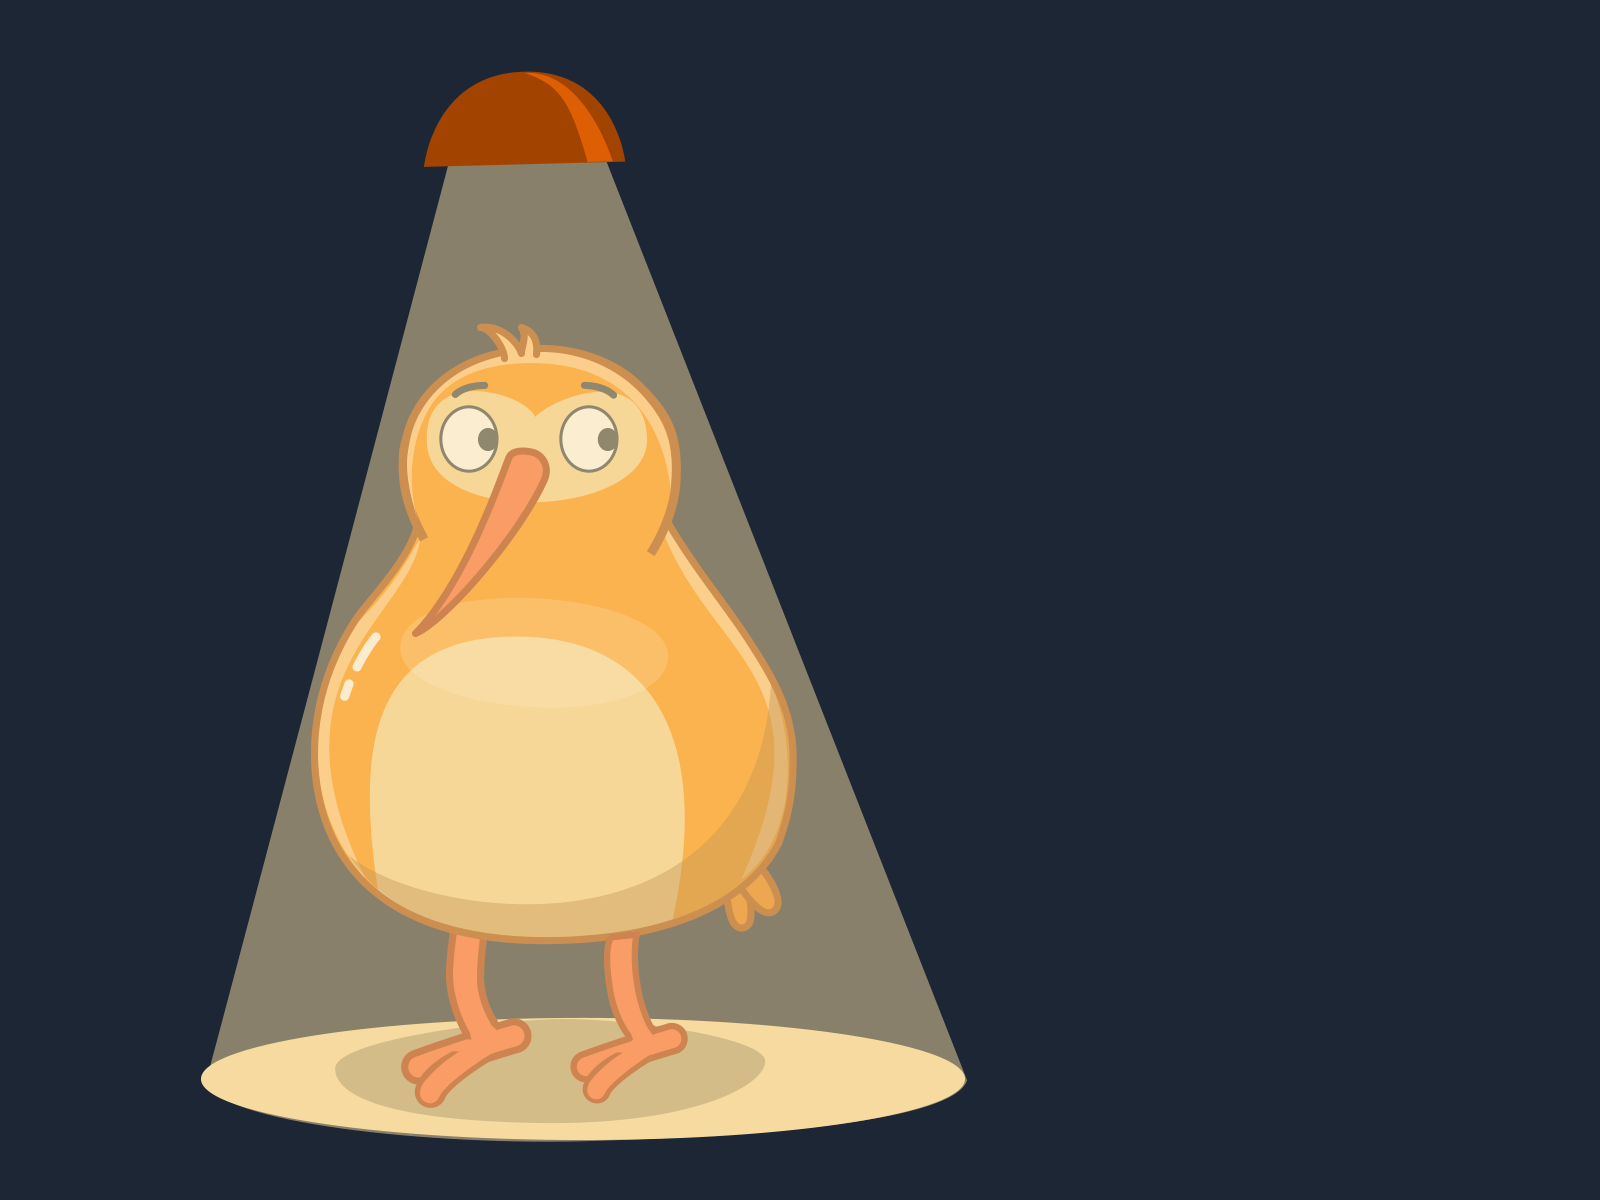 Qiwi aftereffects animaiton animated bird character design characters colors design gomer illustration kiwi motion design qiwi vector